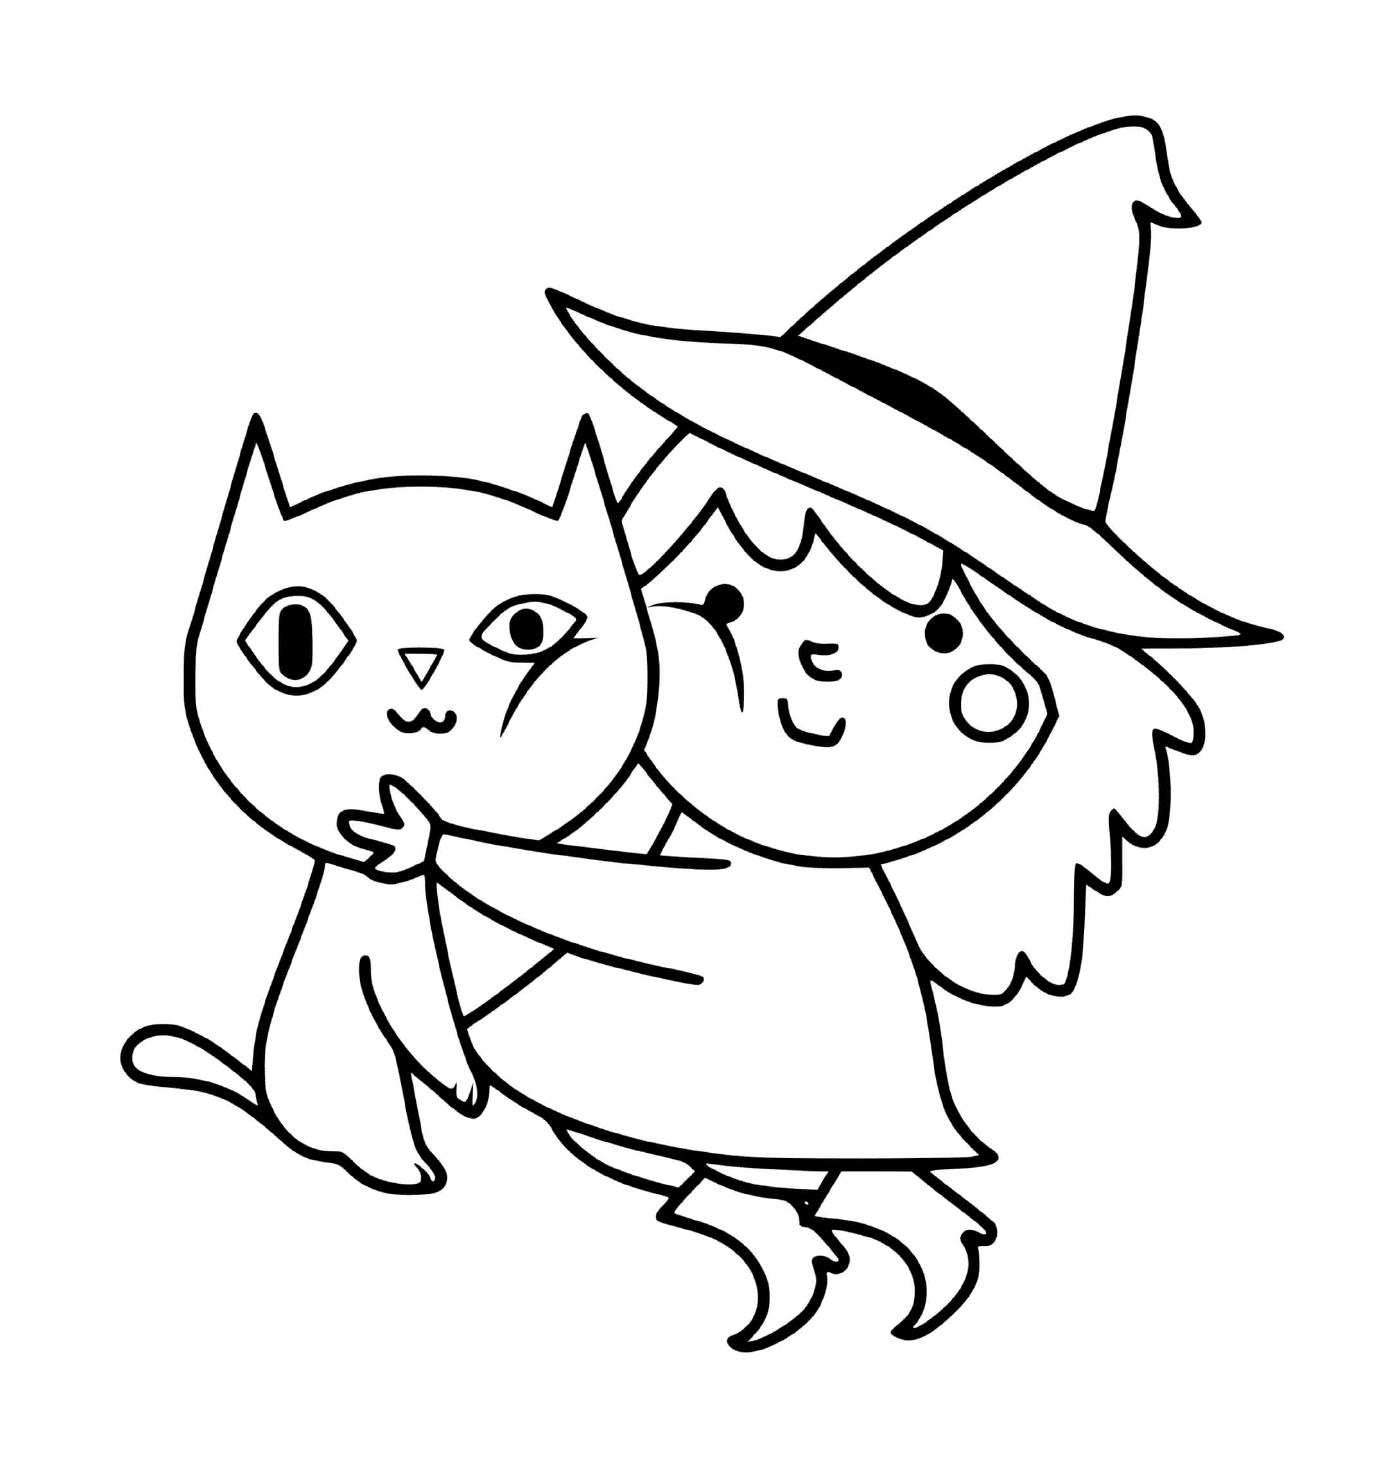  Adorable witch with her black cat 